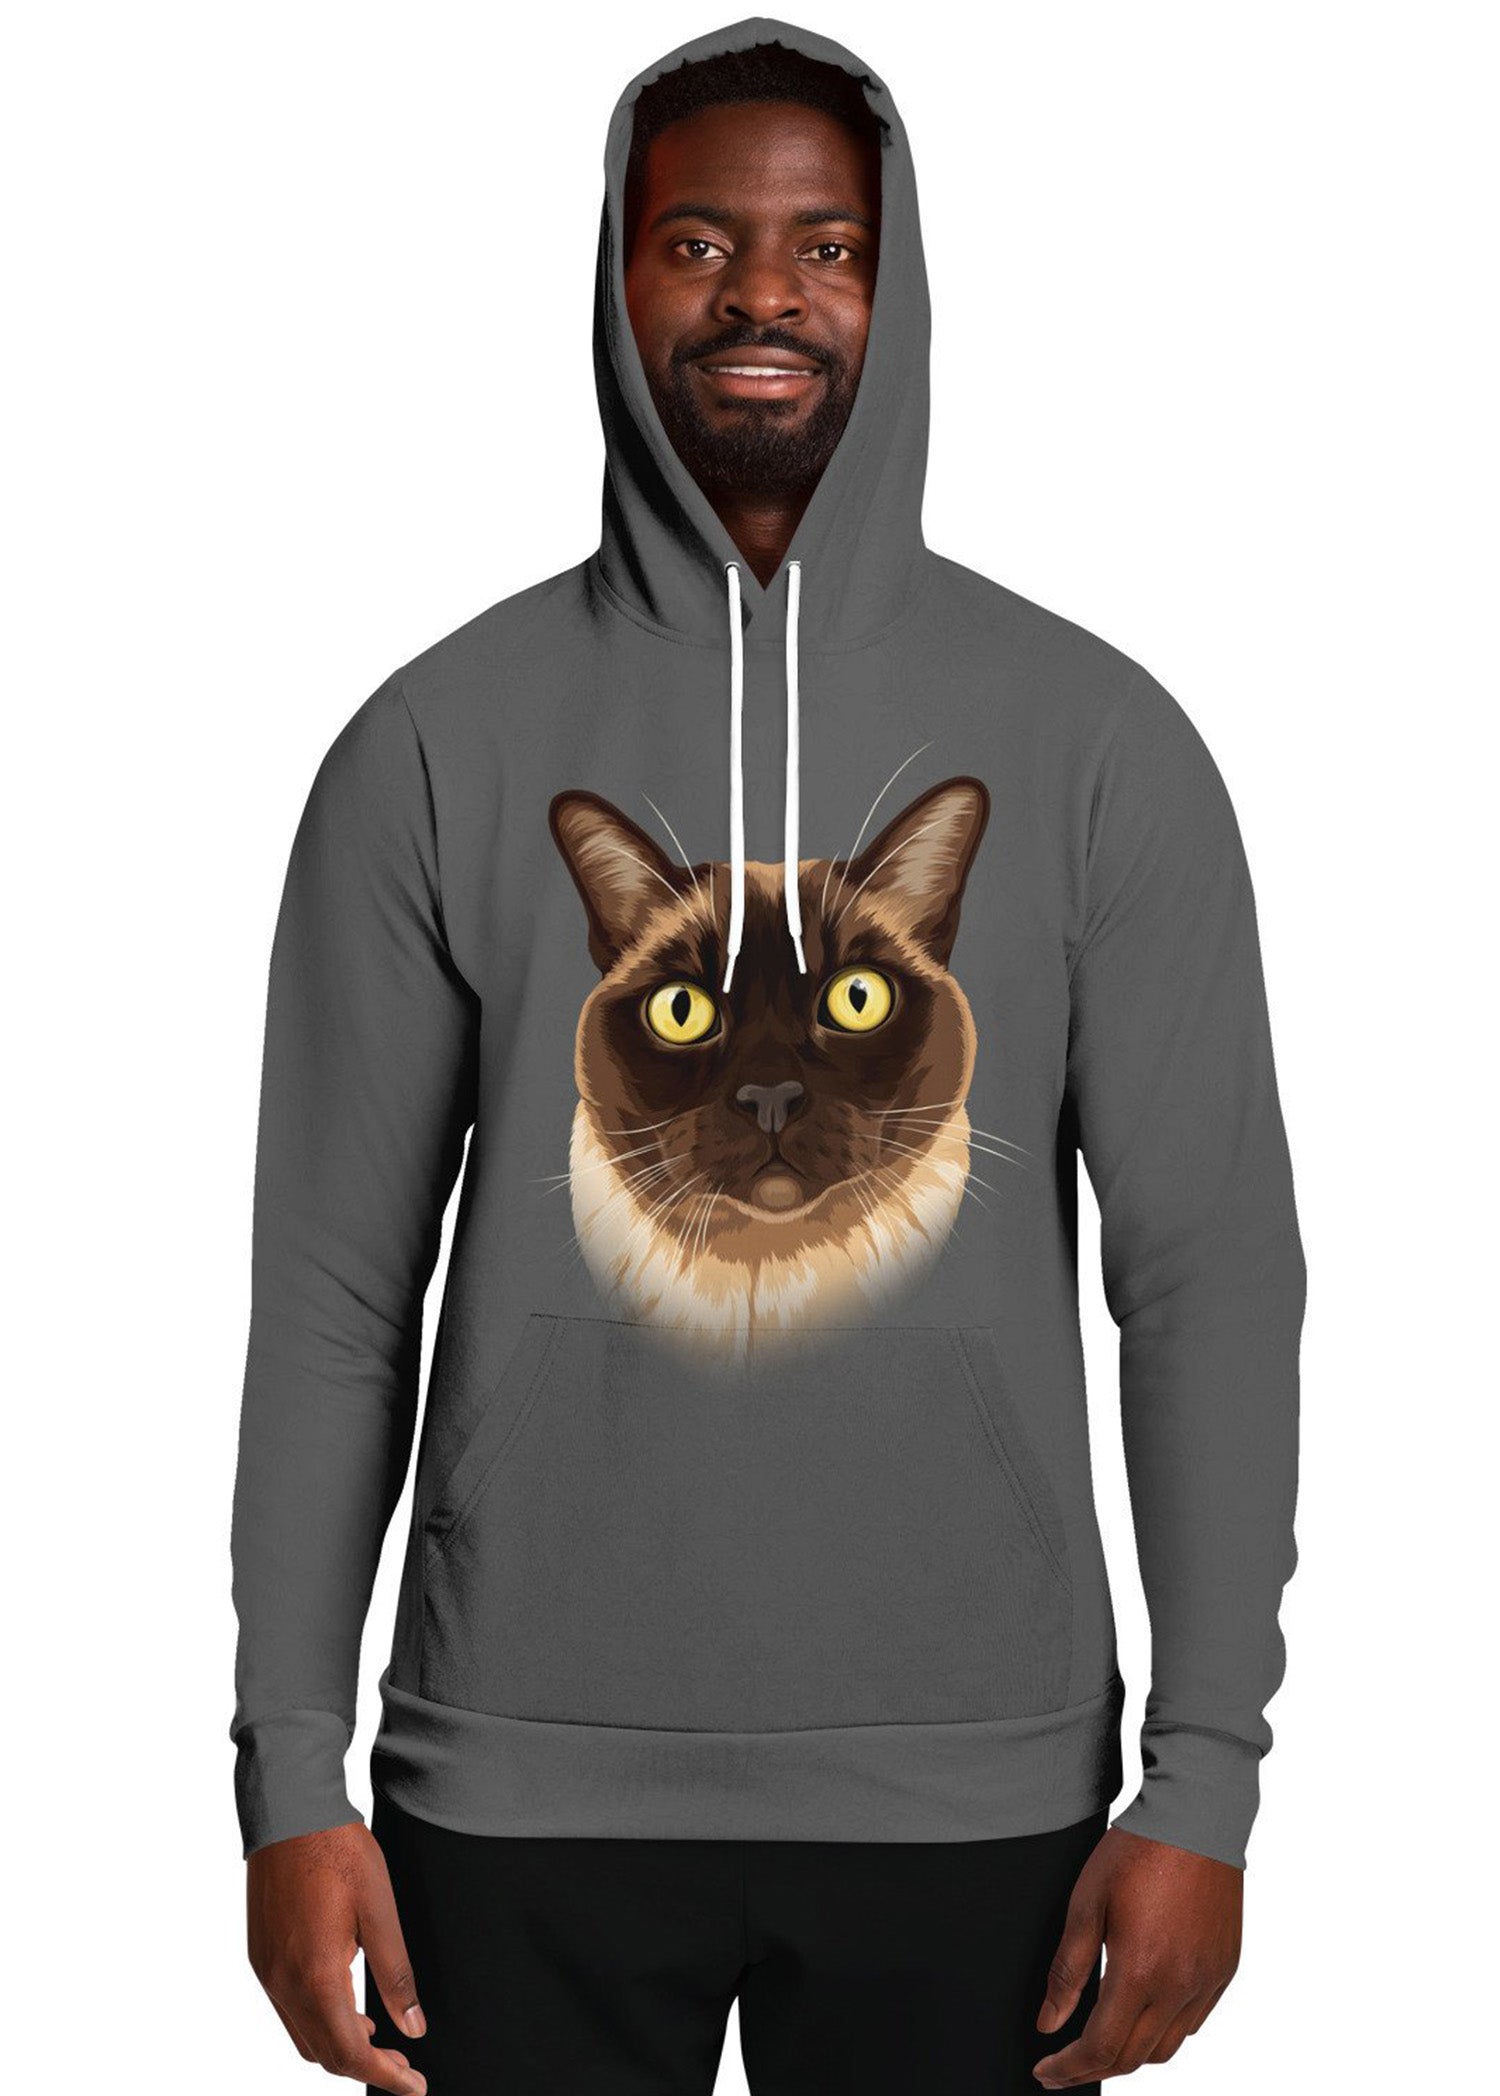 Custom Hoodie (Men's & Women's): Orig. Face Art (NEXT-DAY prod. avail. at checkout) (Dog, Cat, Human Face)